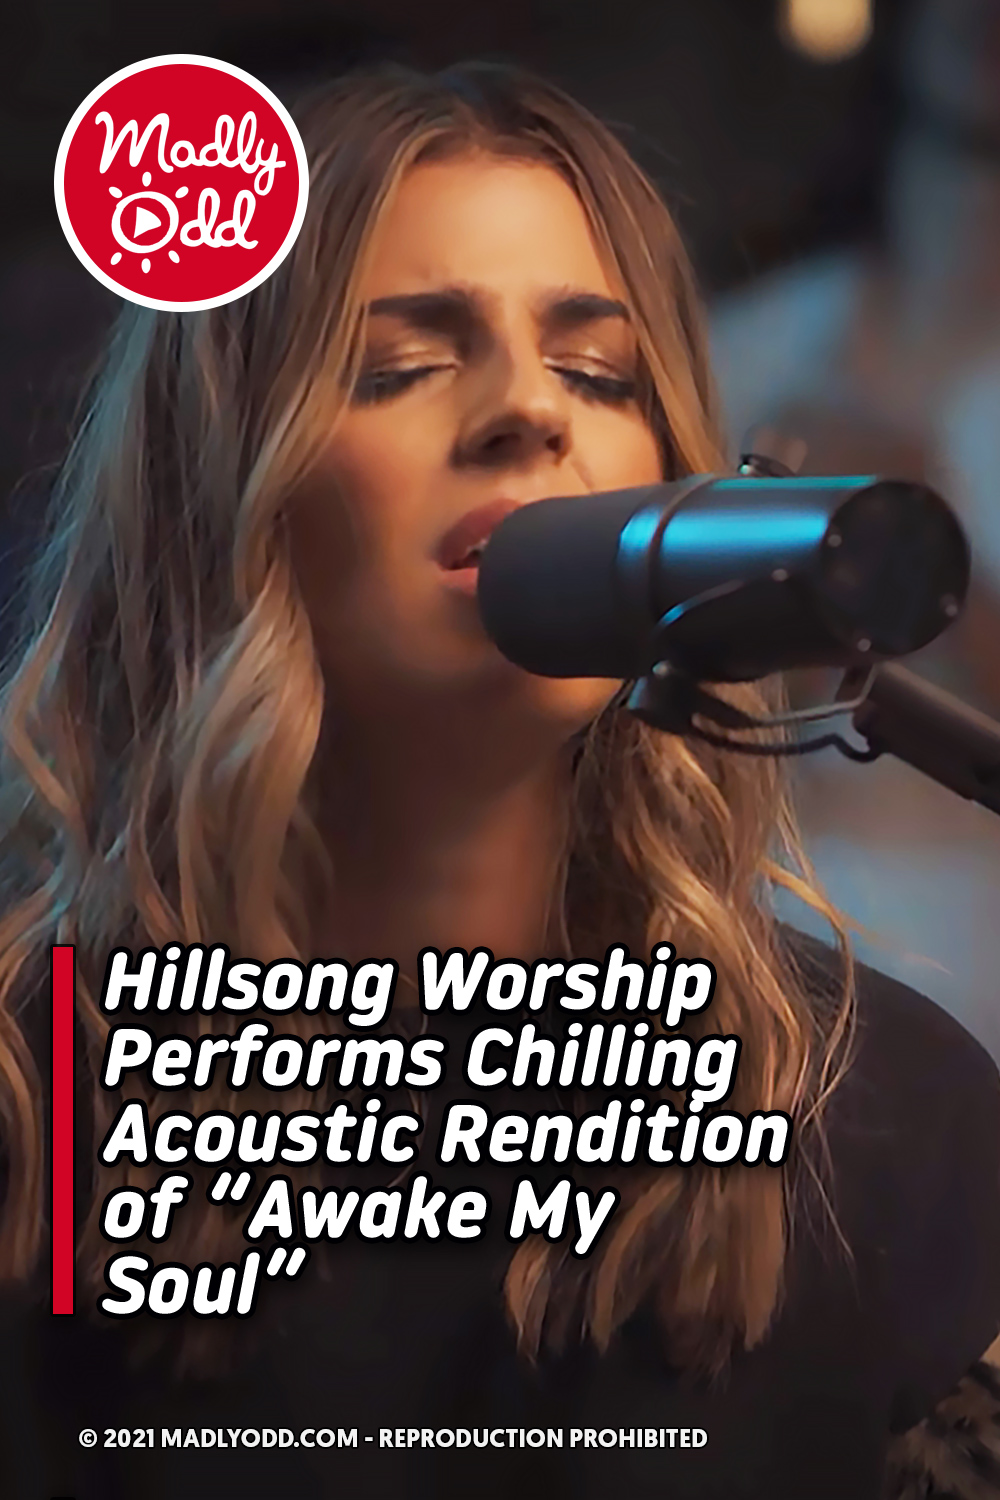 Hillsong Worship Performs Chilling Acoustic Rendition of “Awake My Soul”